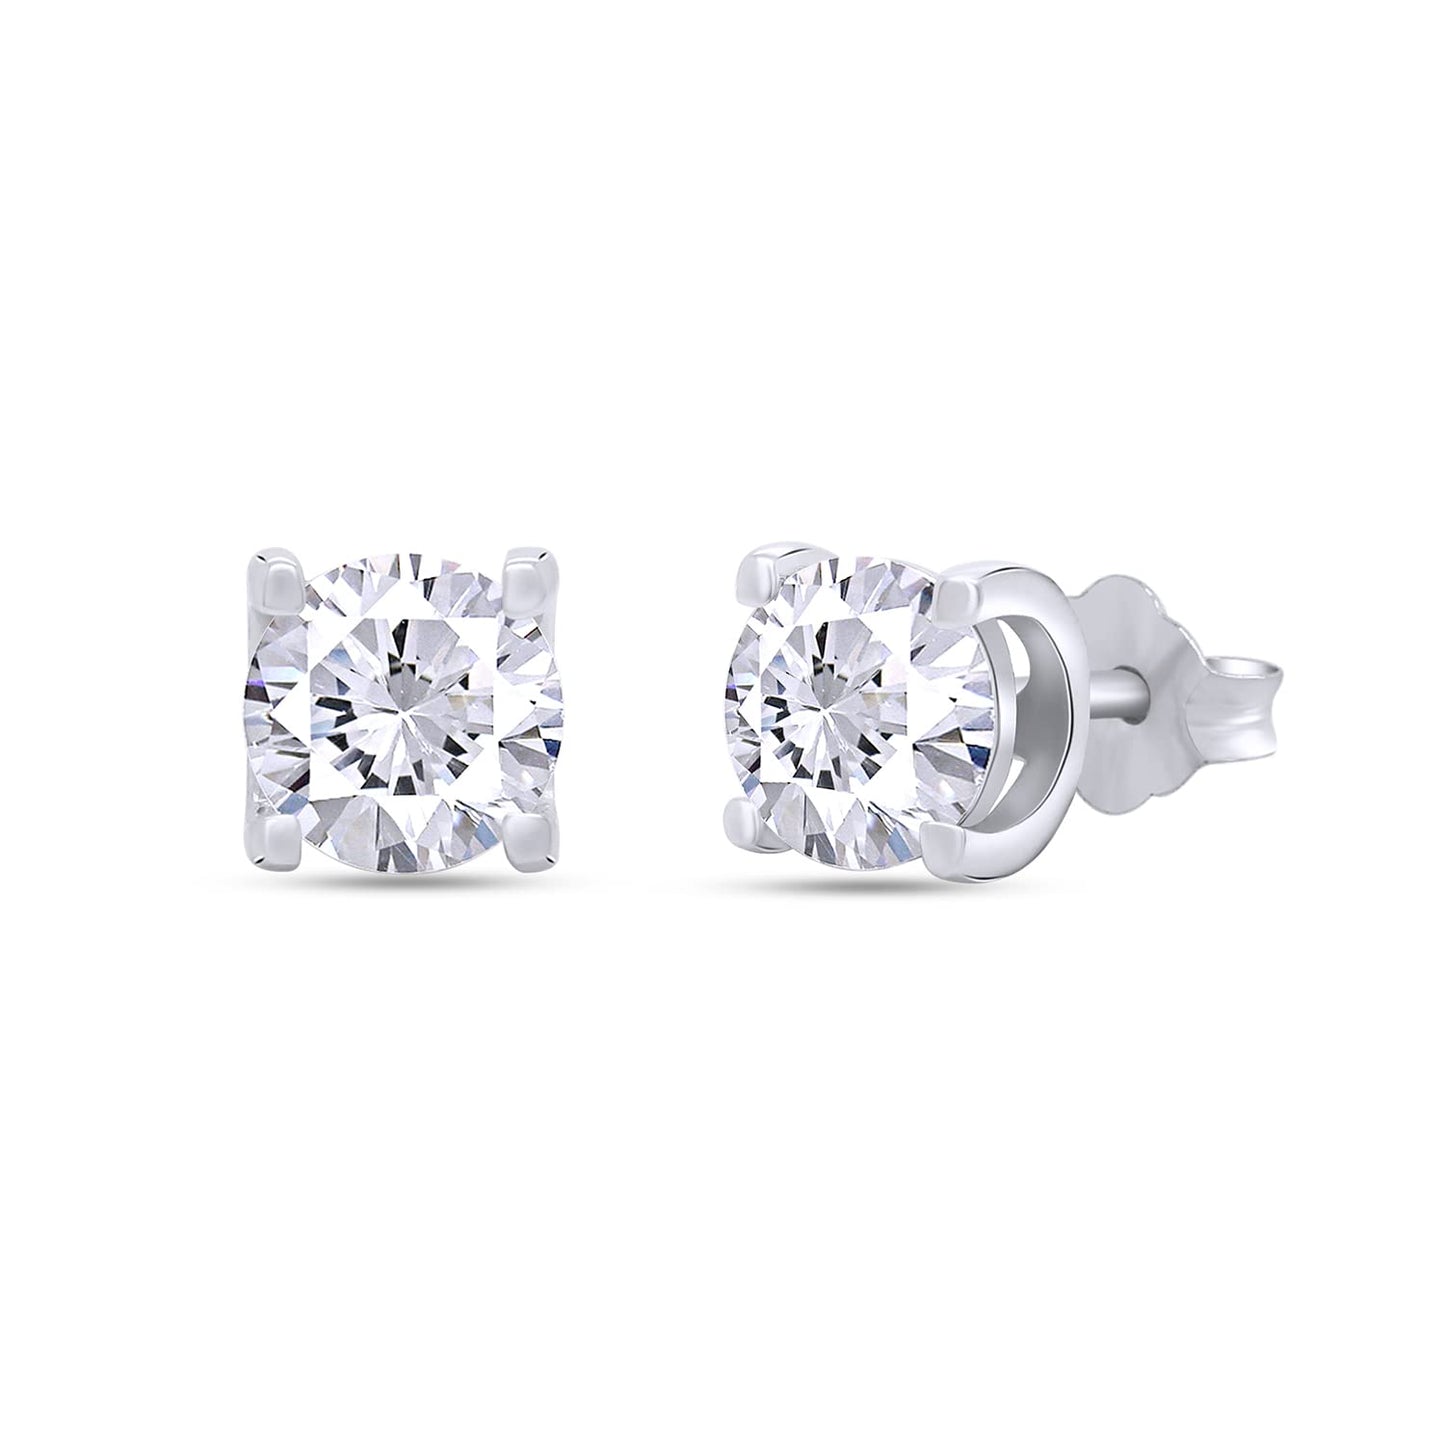 Load image into Gallery viewer, 2 Carat Round Cut 6.5MM Lab Created Moissanite Diamond Push Back Stud Earrings In 925 Sterling Silver (2 Cttw)
